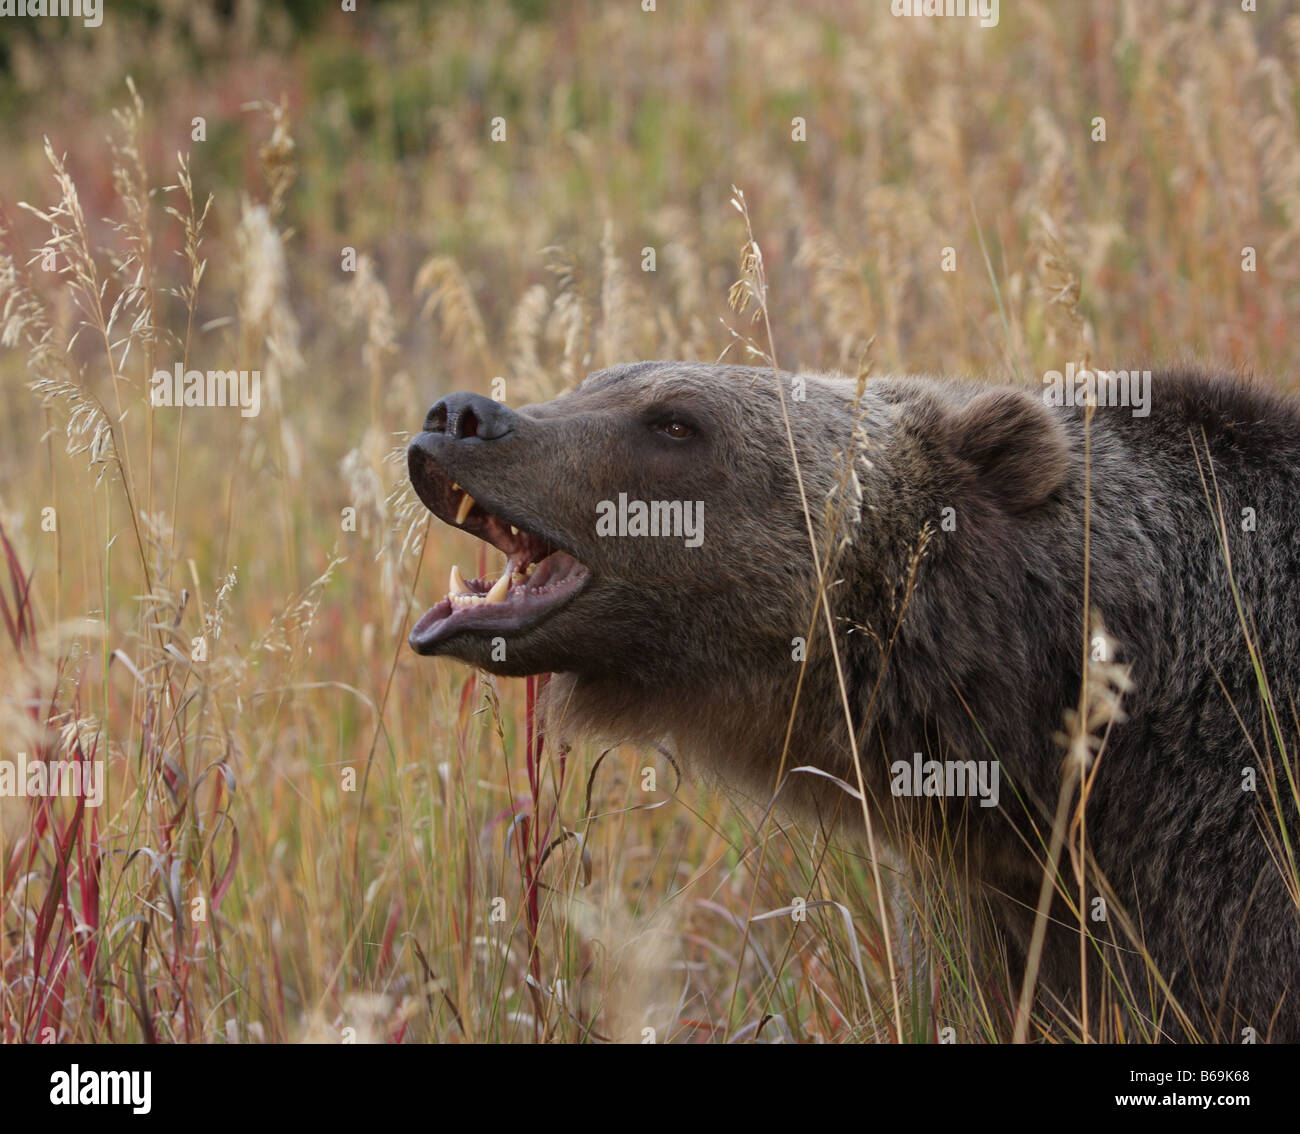 Grizzly bear in long grass Stock Photo